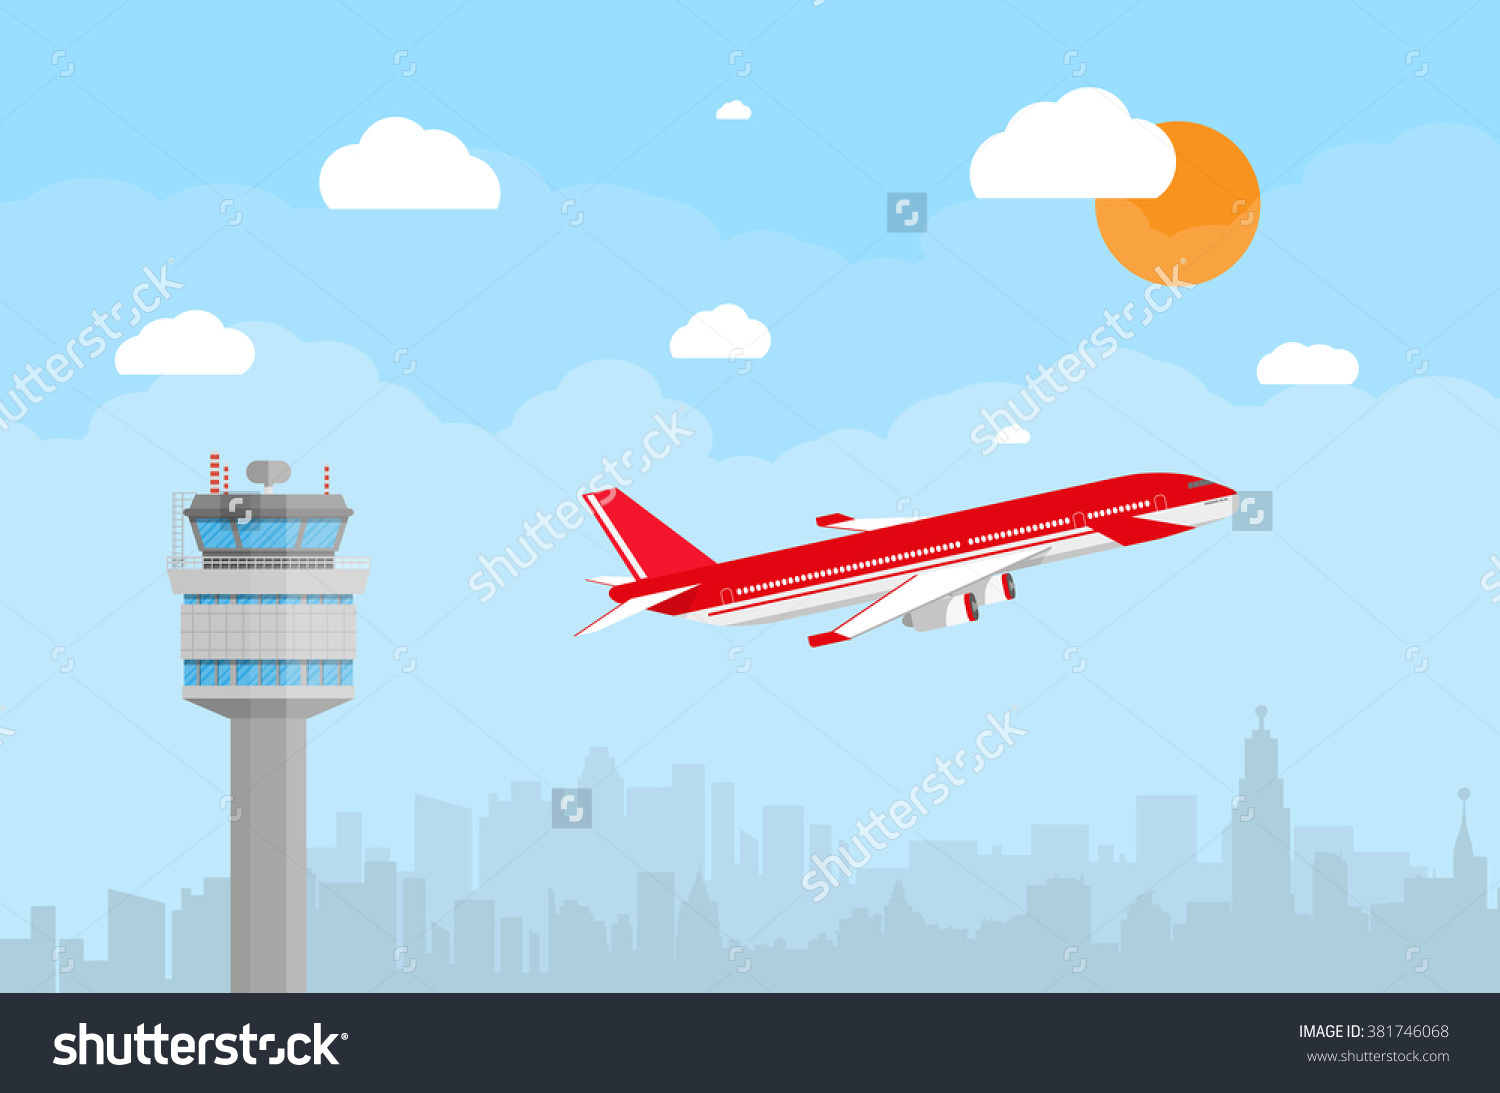 airport tower clipart - photo #49